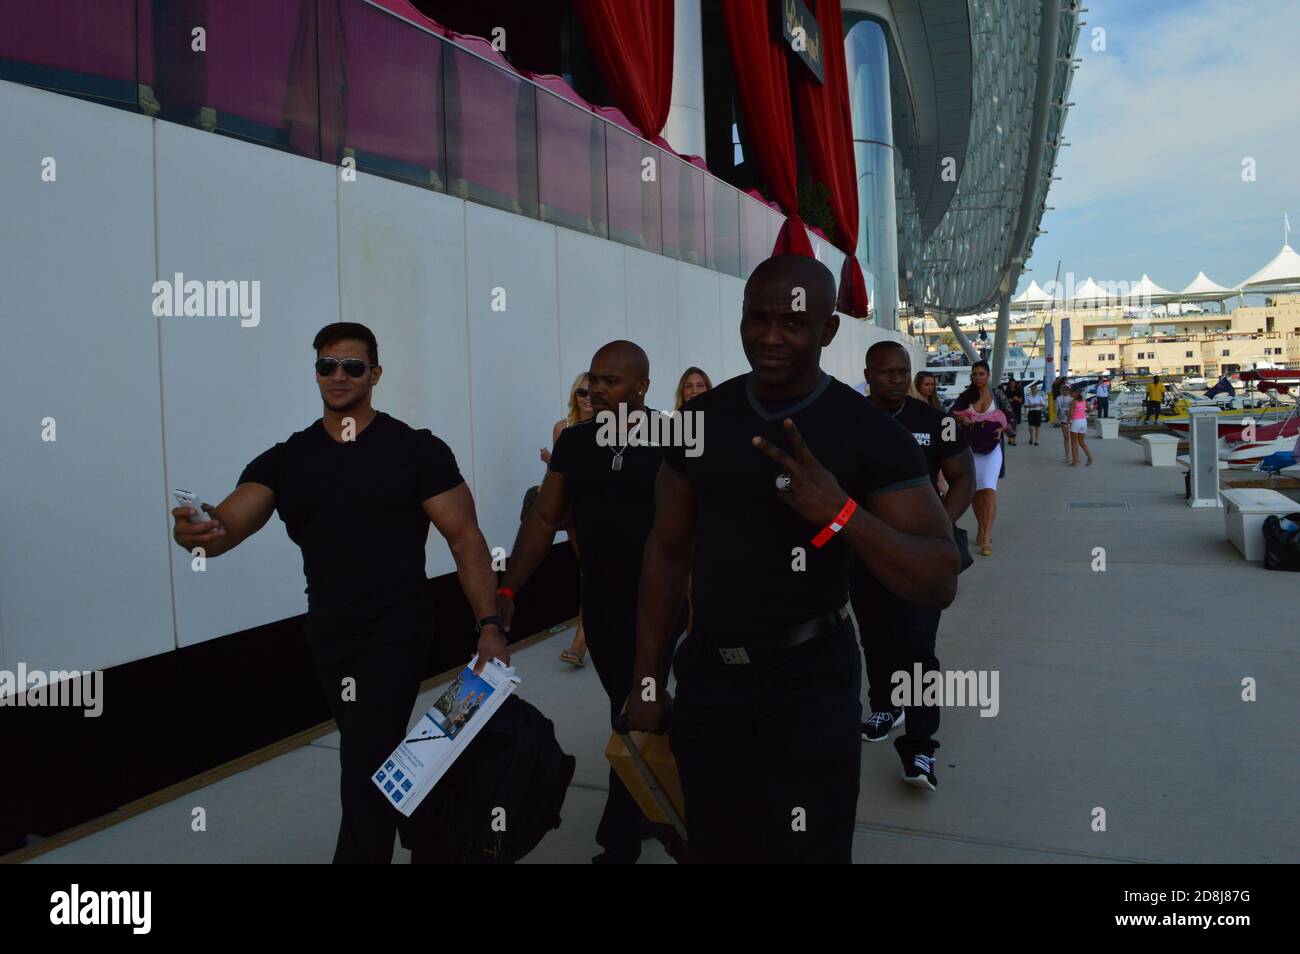 A team of highly skilled and physically fit security personnel escort the premises of Yas Hotel at Yas Marina. Stock Photo